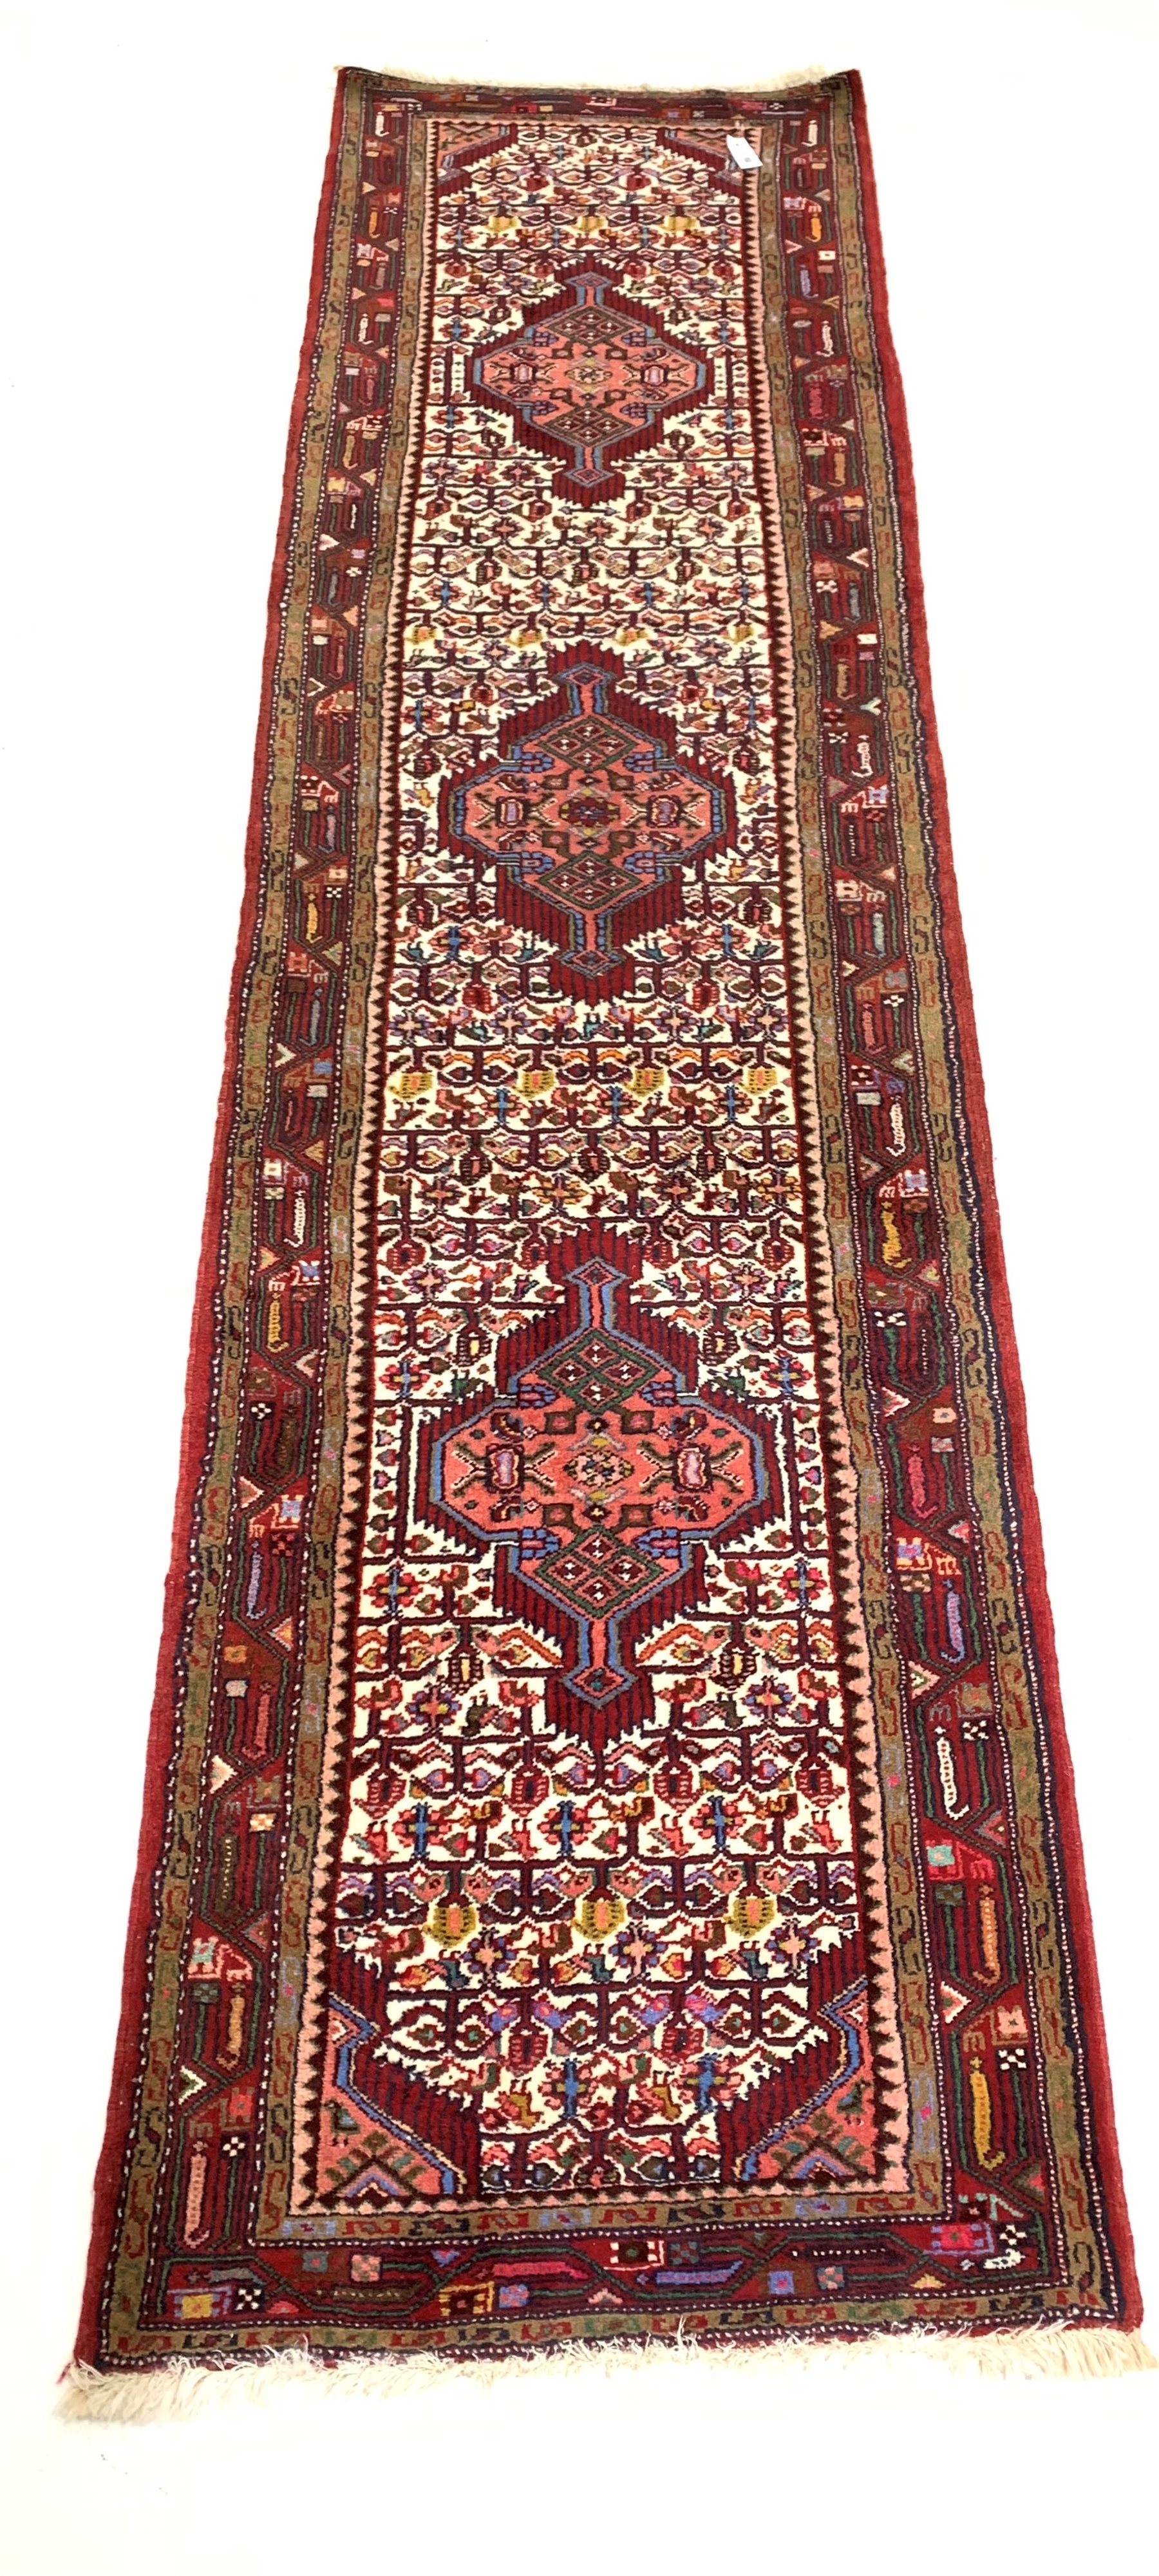 Iranian runner, triple medallion on pale field decorated with repeating motifs